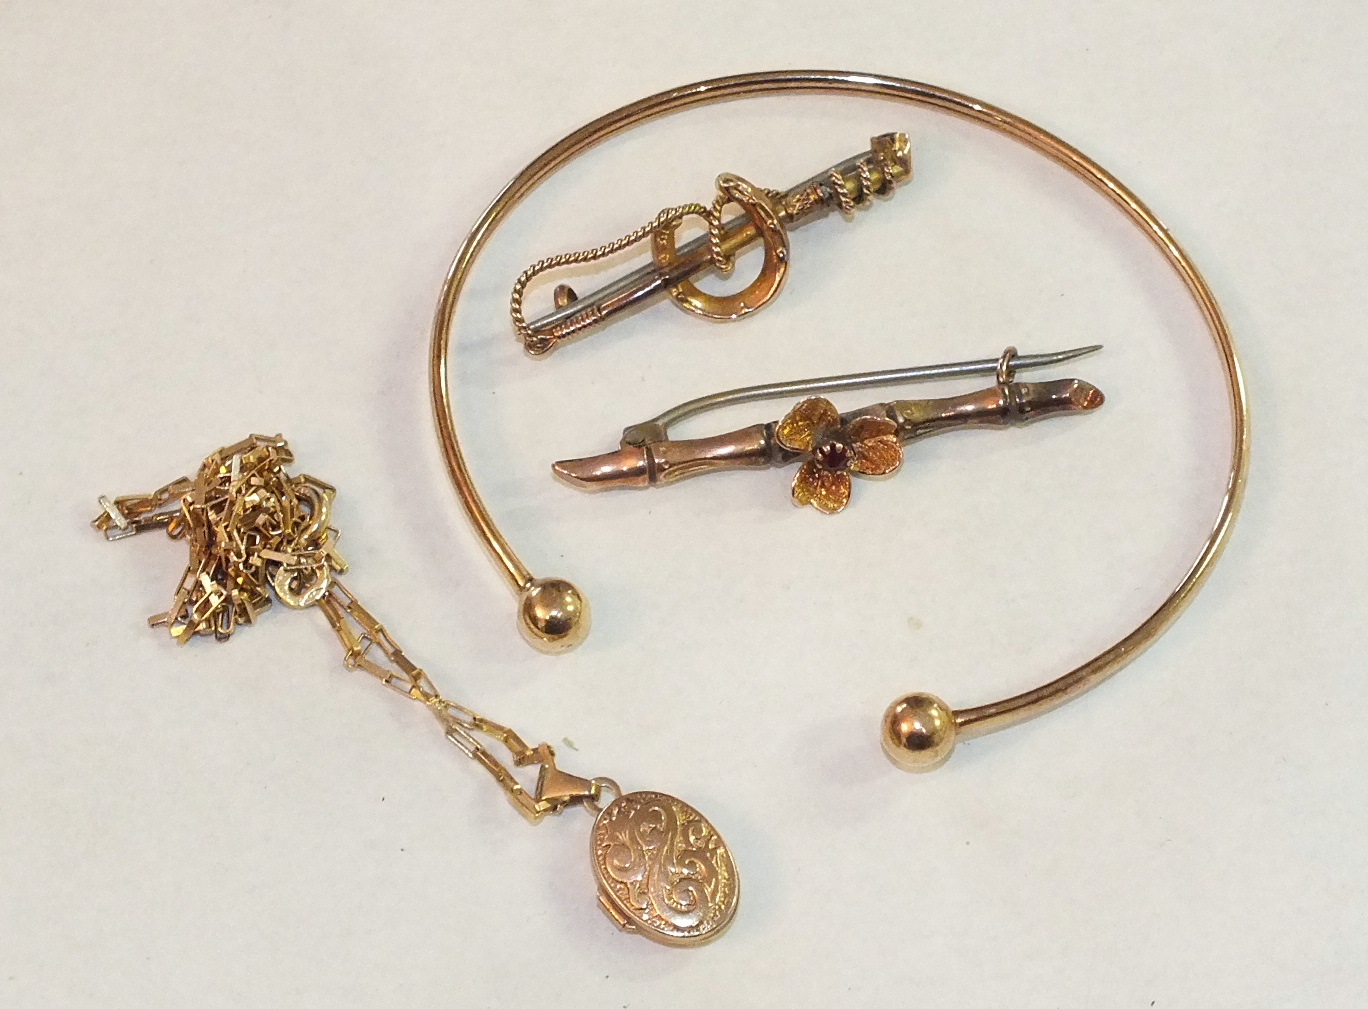 A 9ct gold bangle with bead terminals, a small 9ct gold locket on chain and two small brooches, (1